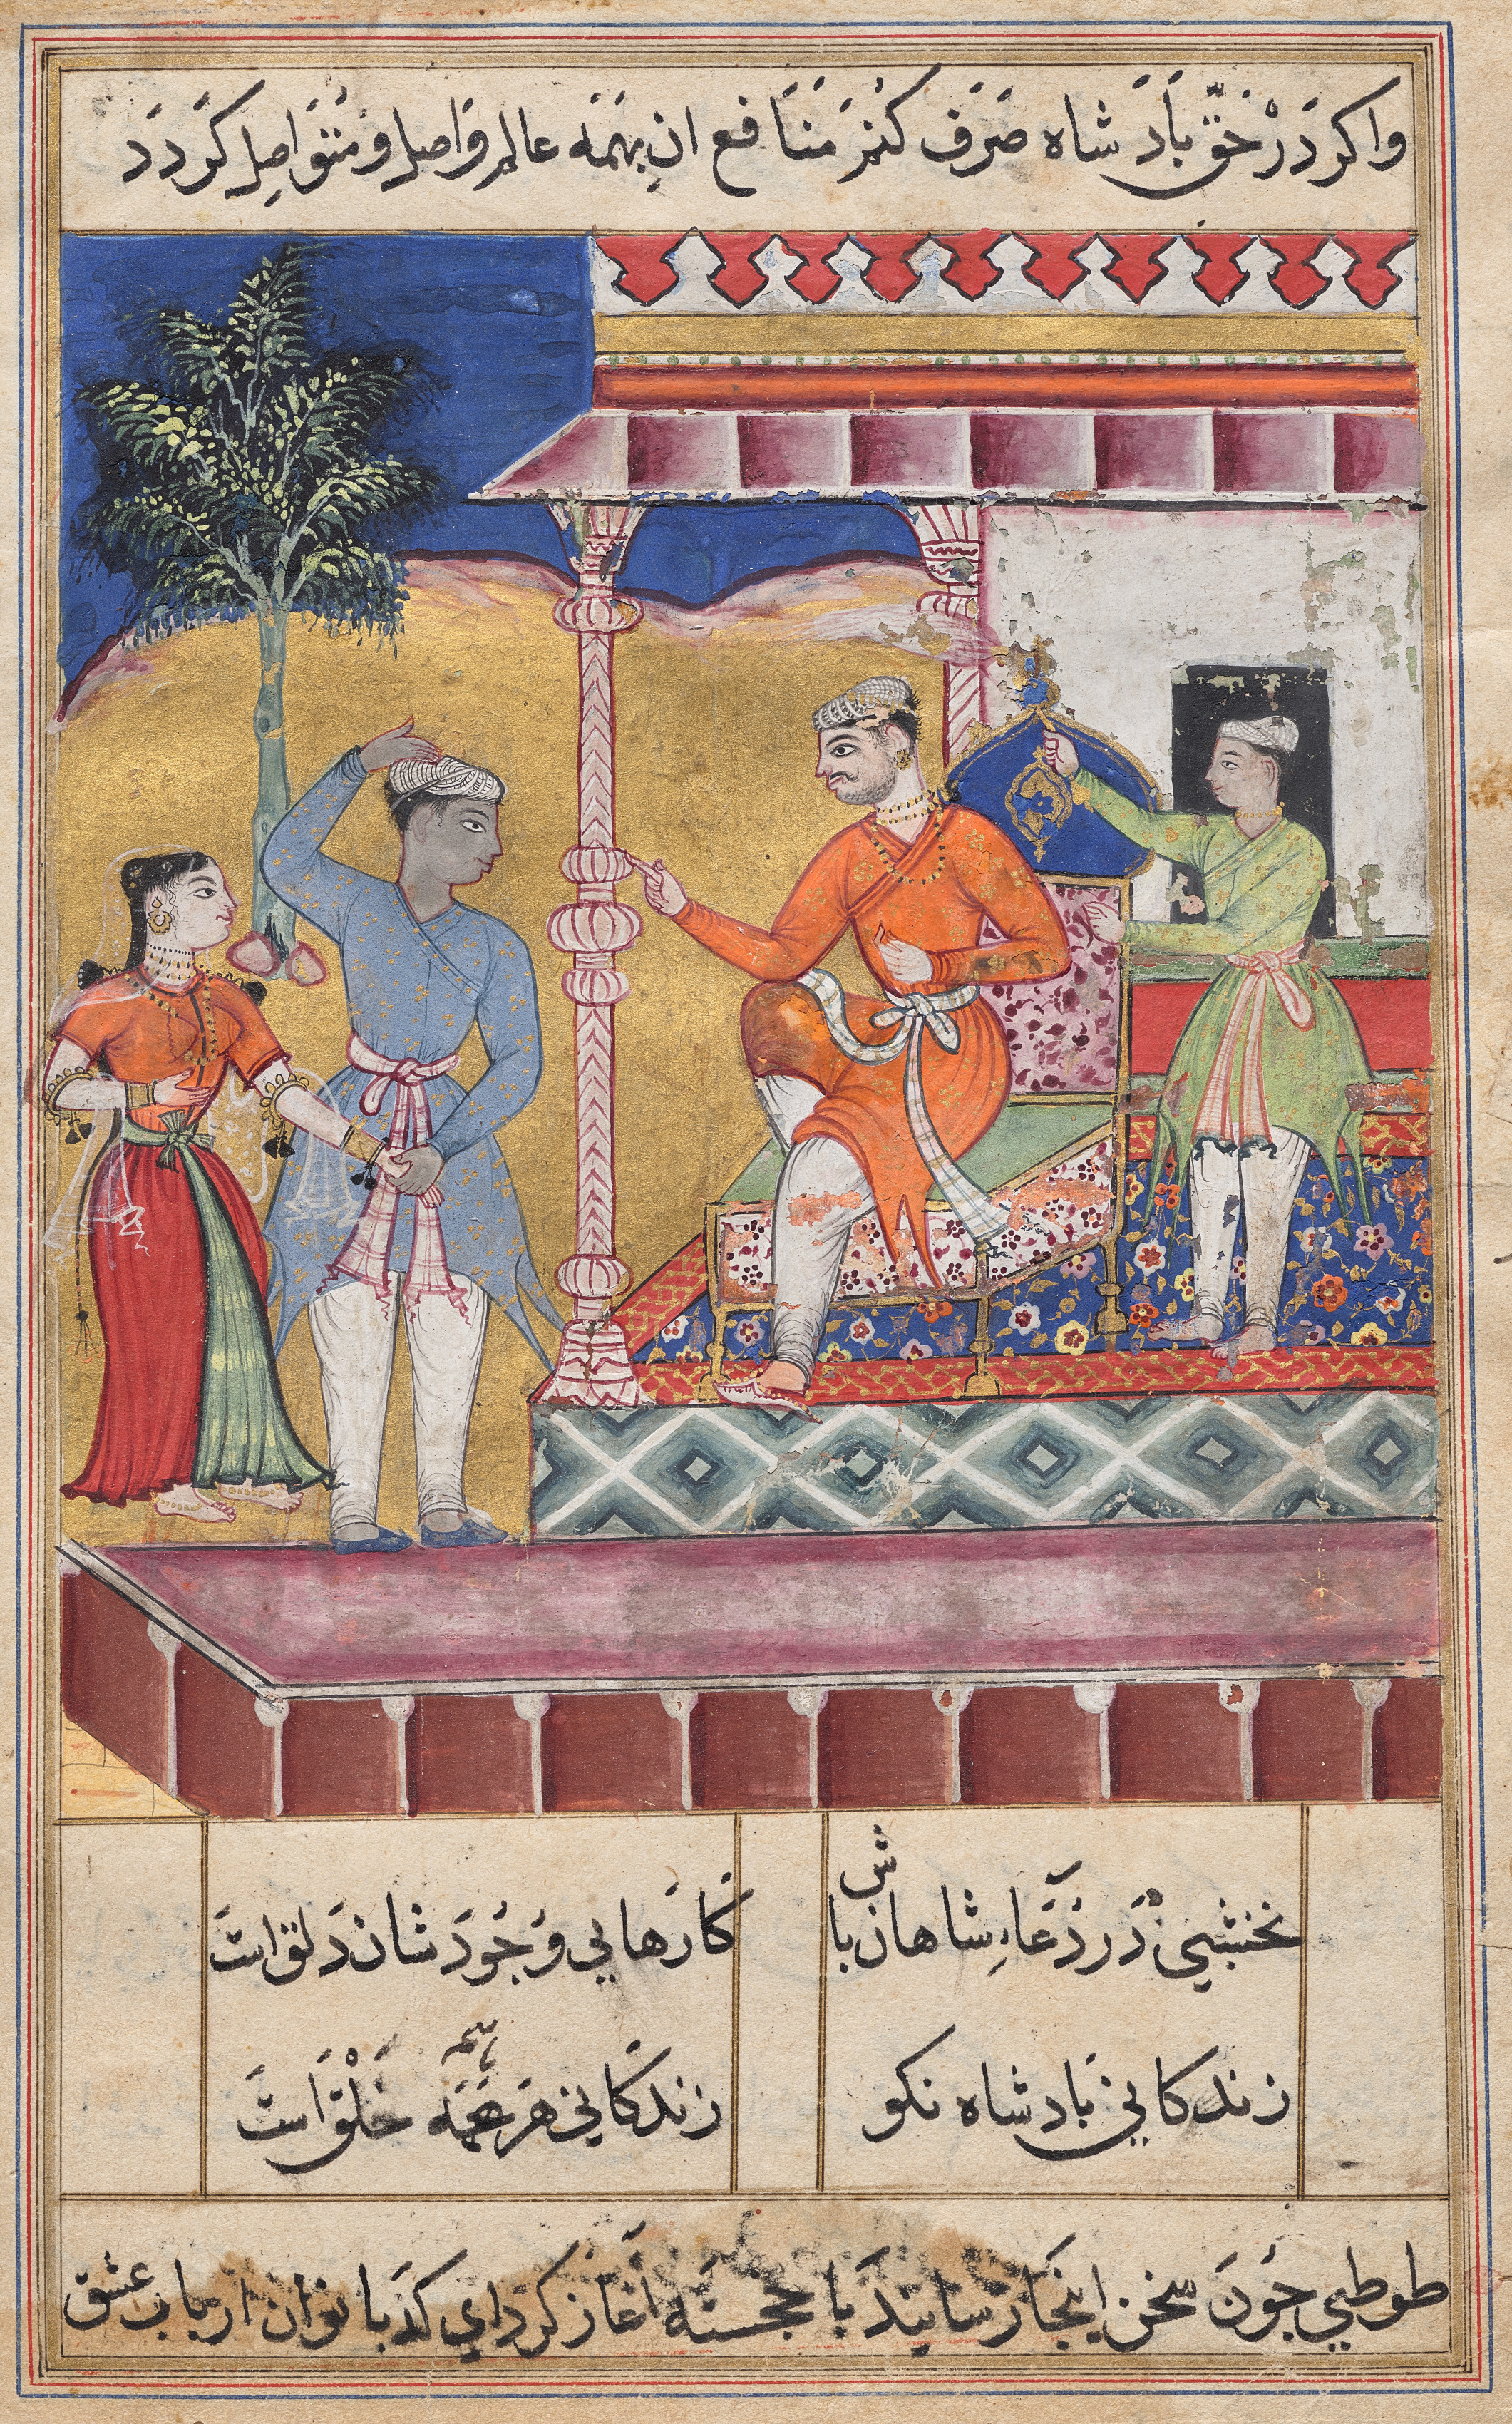 The rejuvenated old man and the daughter of the king of the jinns take leave of the King of Kings, from a Tuti-nama (Tales of a Parrot): Seventh Night